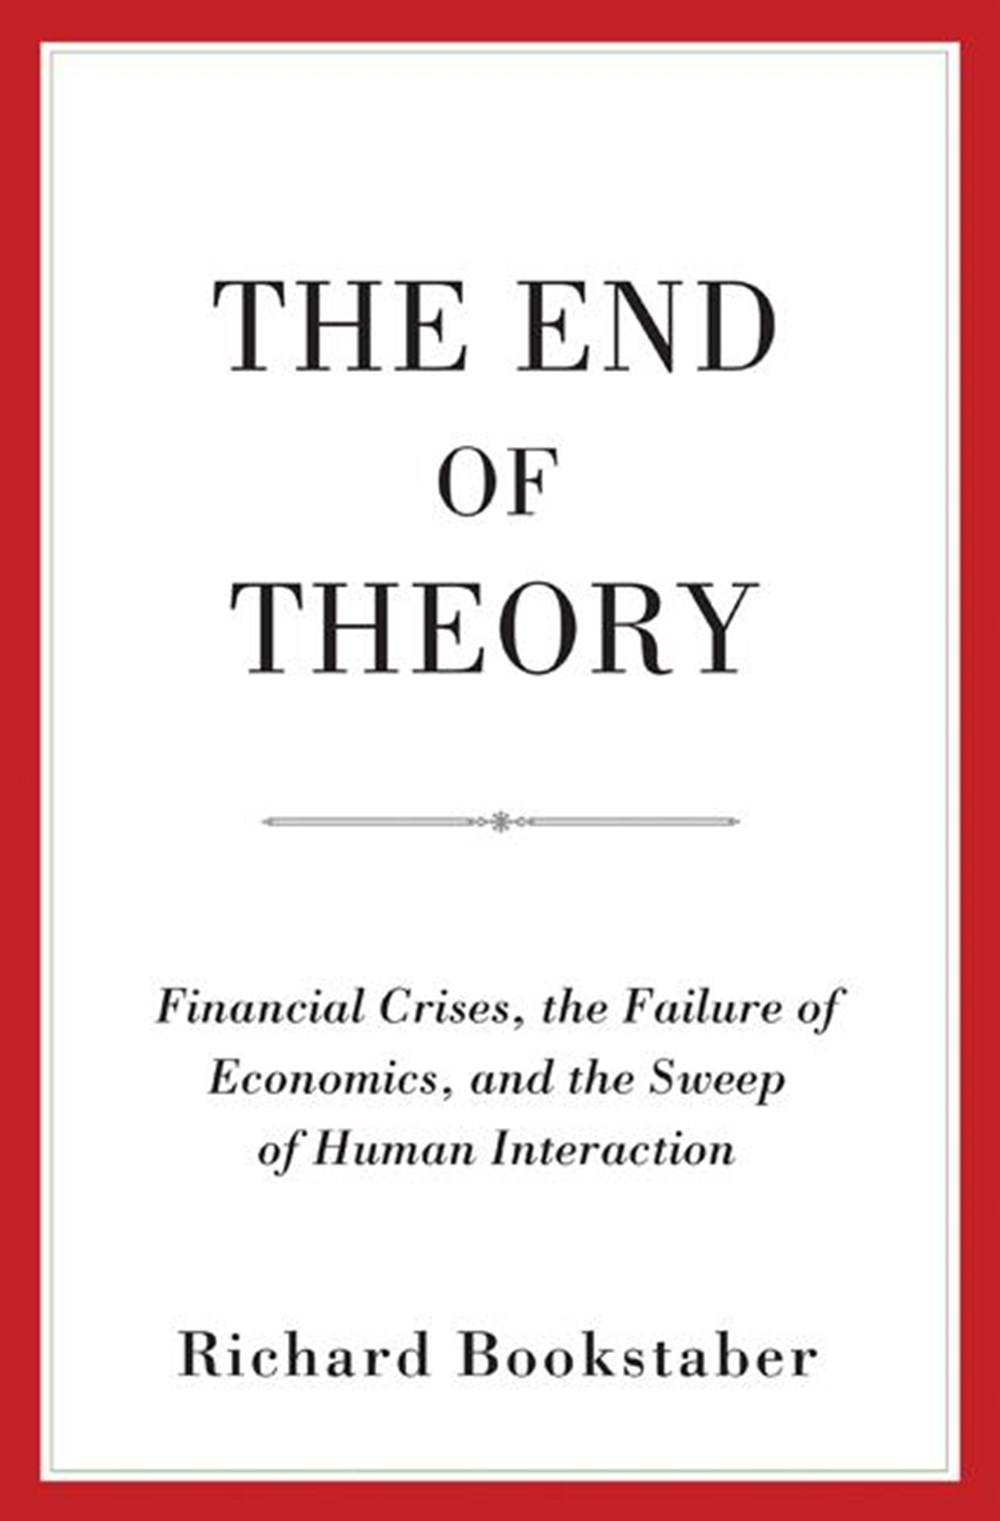 End of Theory: Financial Crises, the Failure of Economics, and the Sweep of Human Interaction